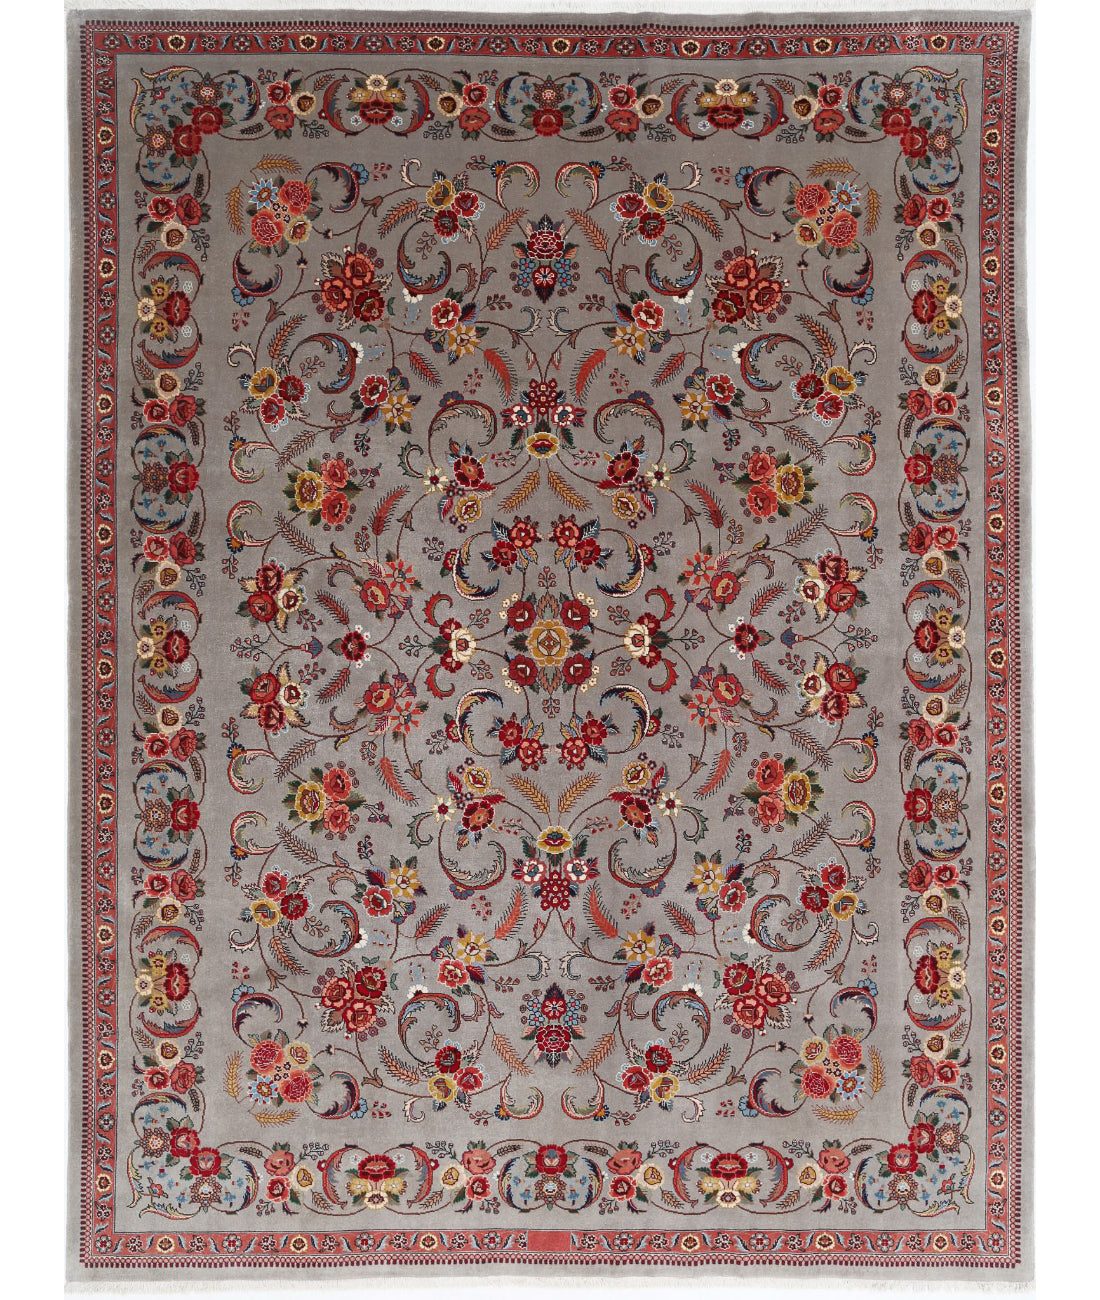 Hand Knotted Heritage Persian Style Wool Rug - 8'6'' x 11'3'' 8'6'' x 11'3'' (255 X 338) / Grey / Red